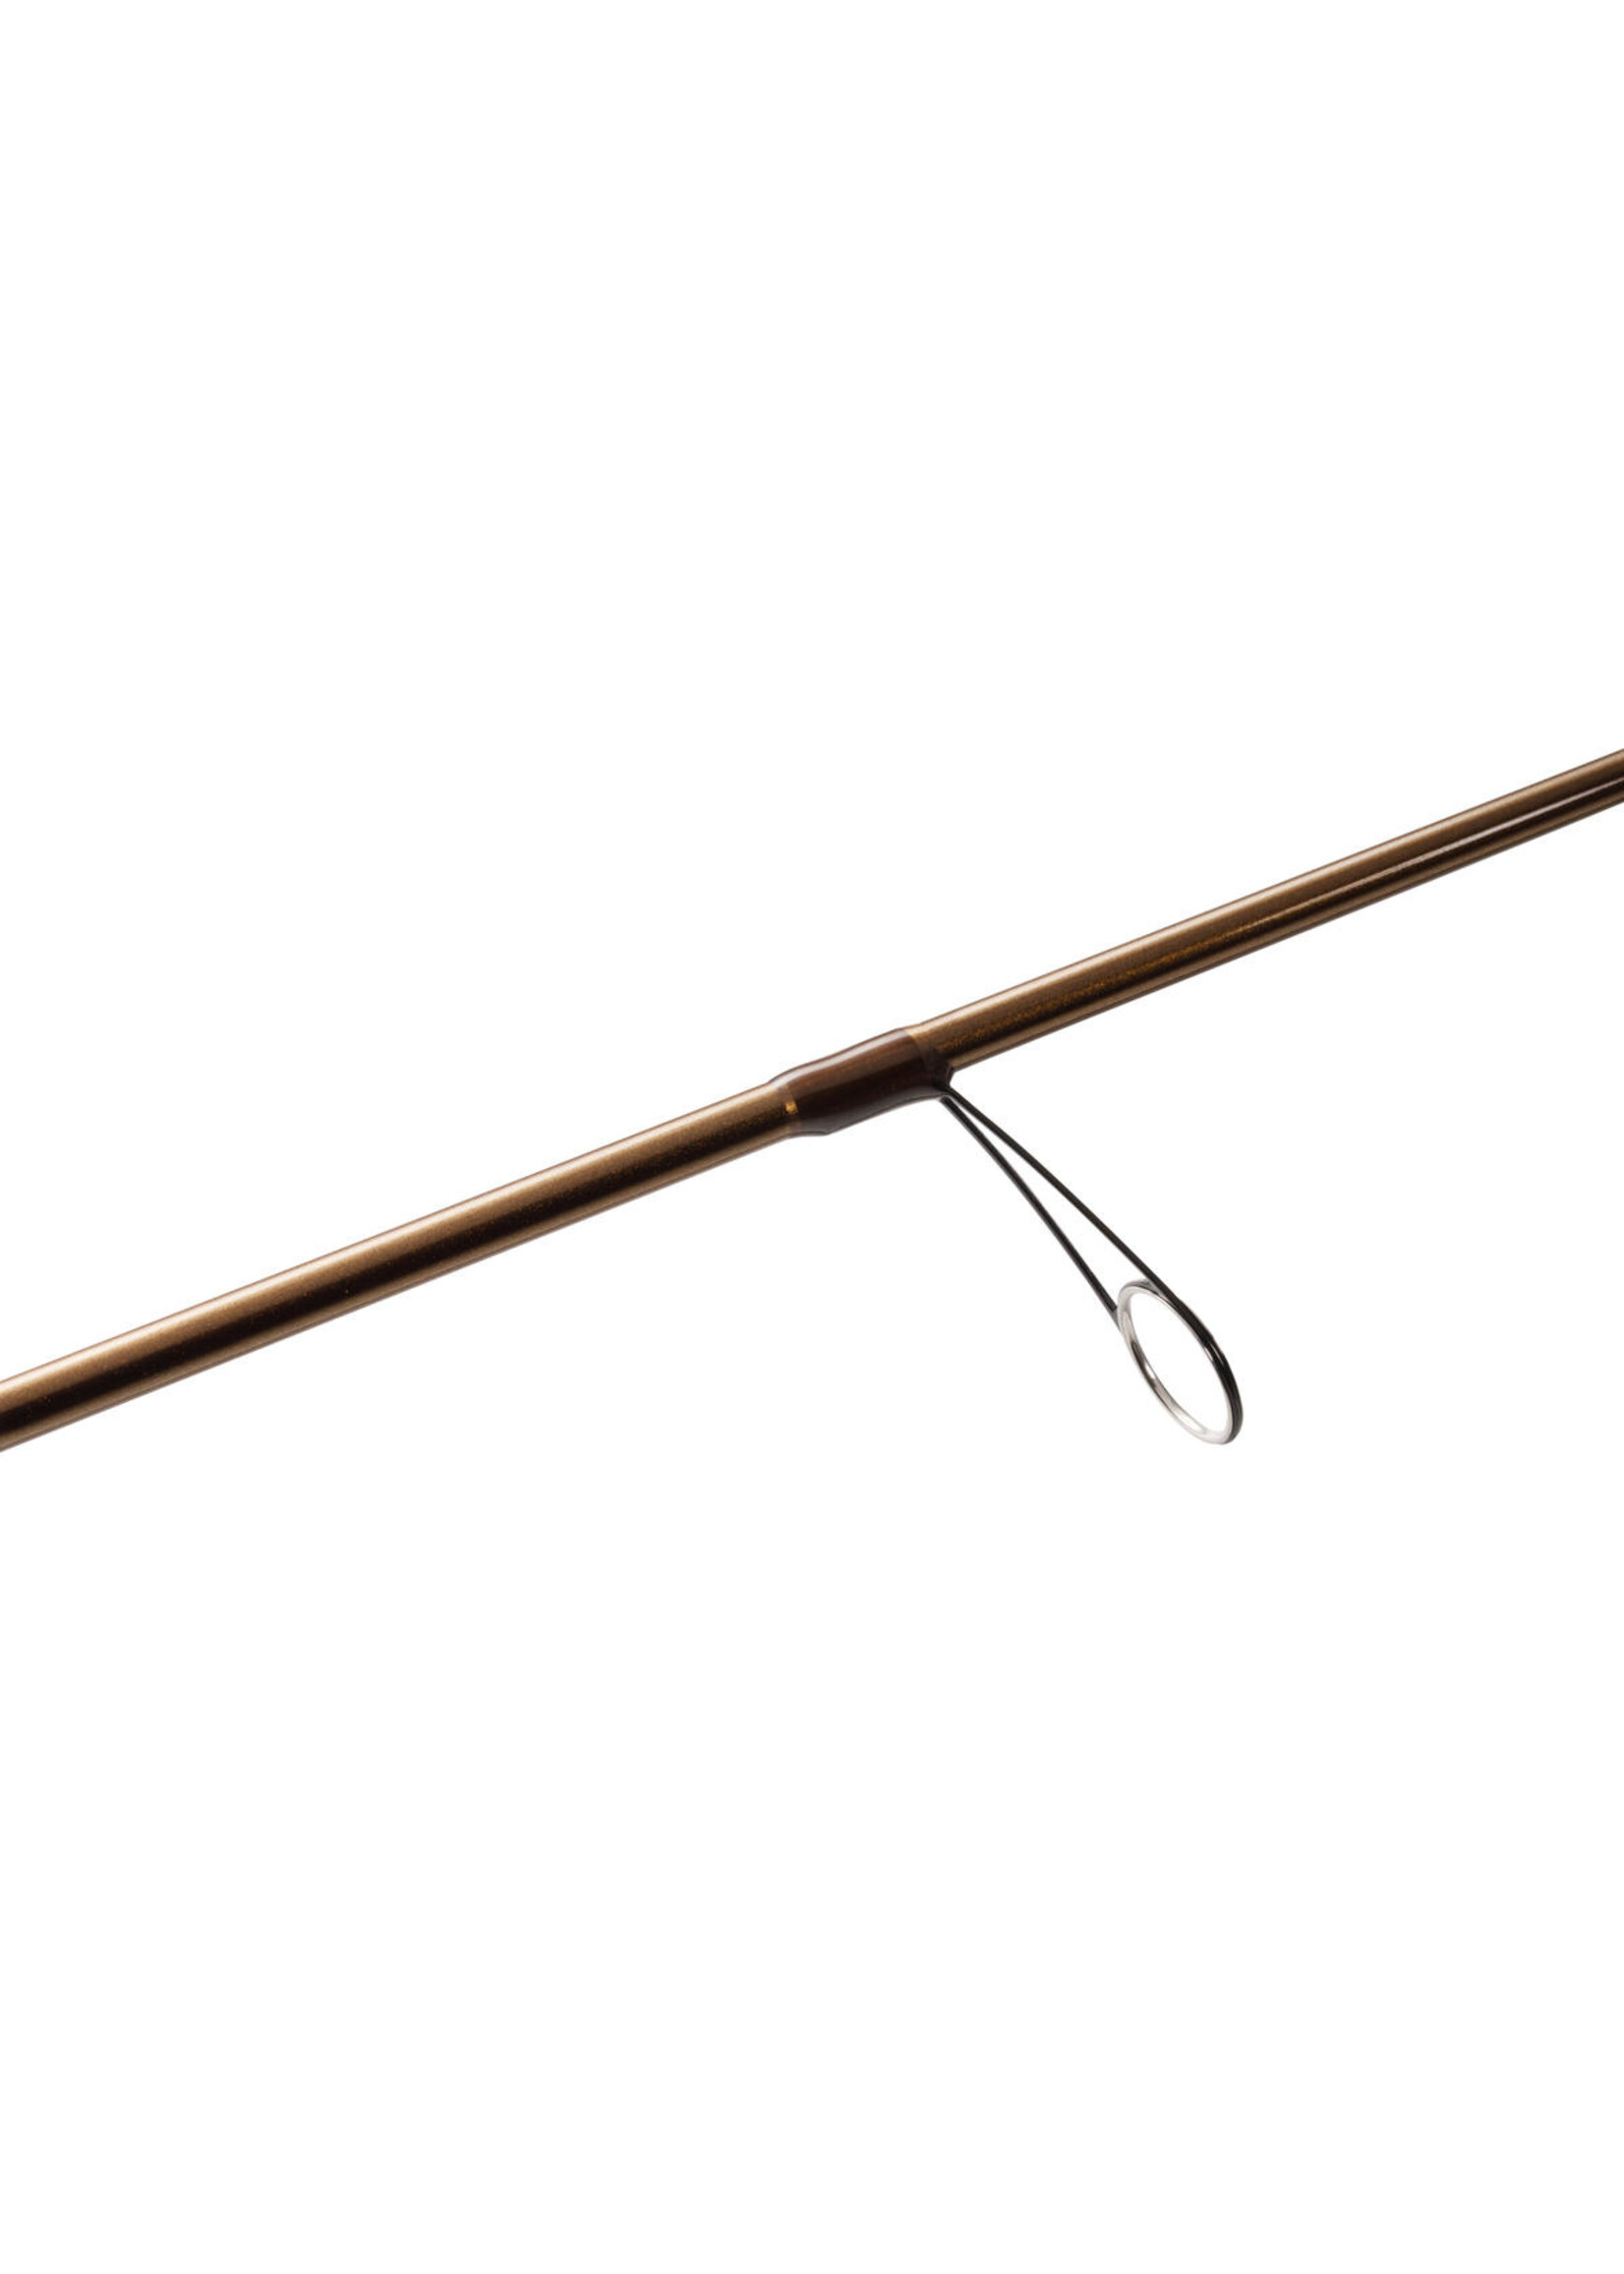 St. Croix St. Croix Panfish Series Spinning Rods